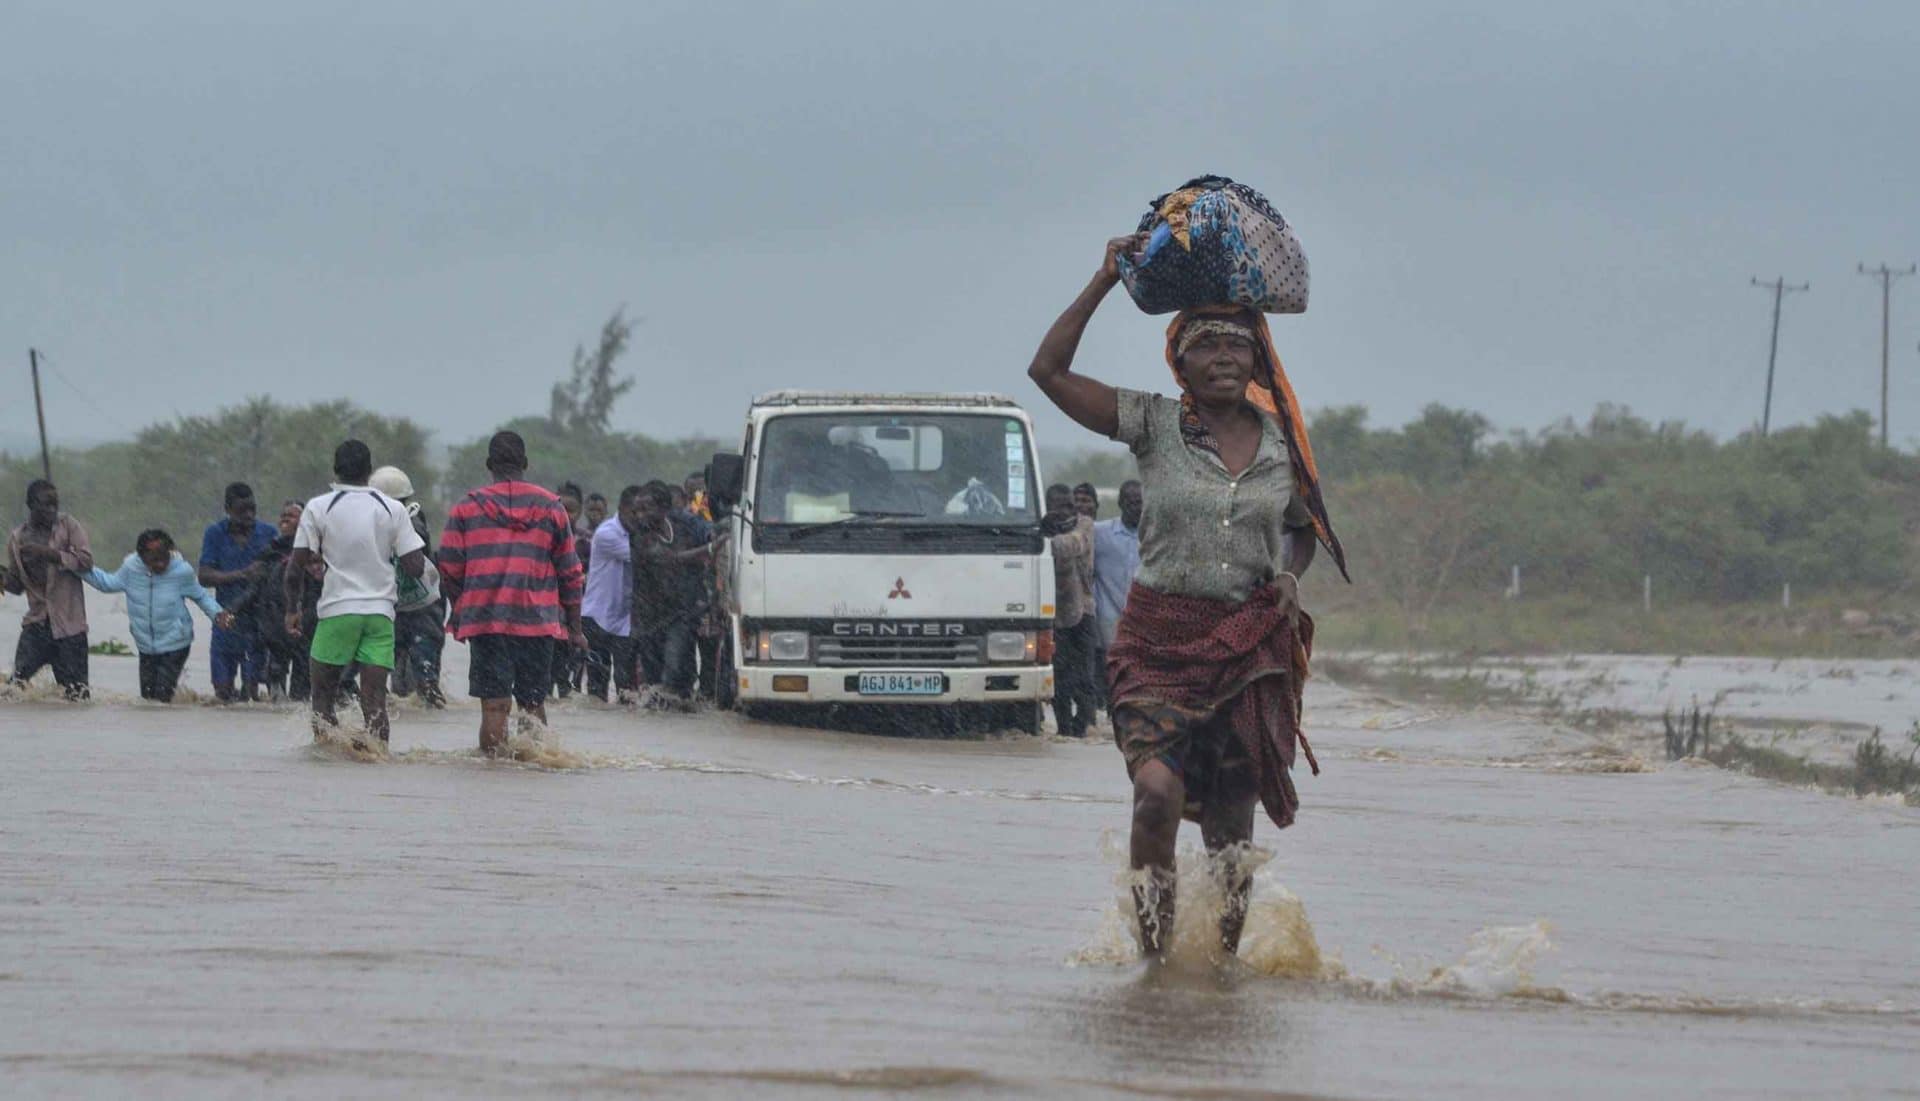 Residents brave the floods in Mazive, southern Mozambique, on April 28, 2019, days after Cyclone Kenneth made landfall in the region.